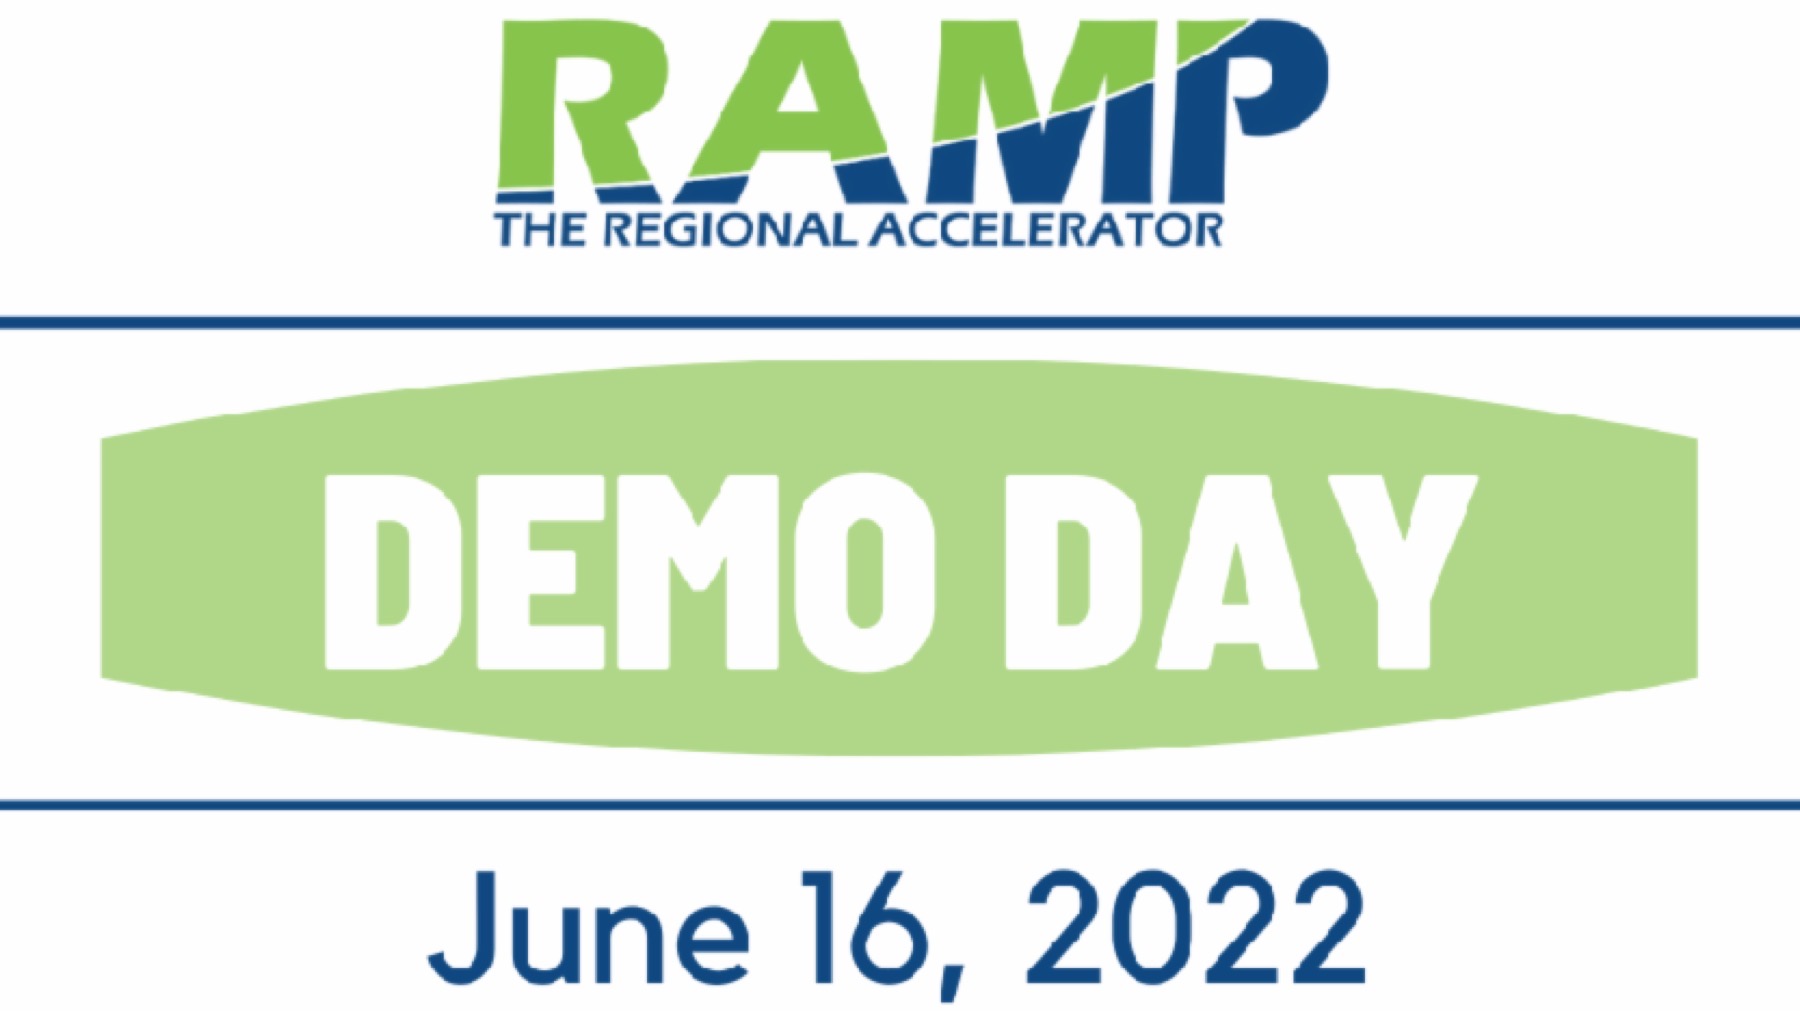 DEMO DAY is June 16